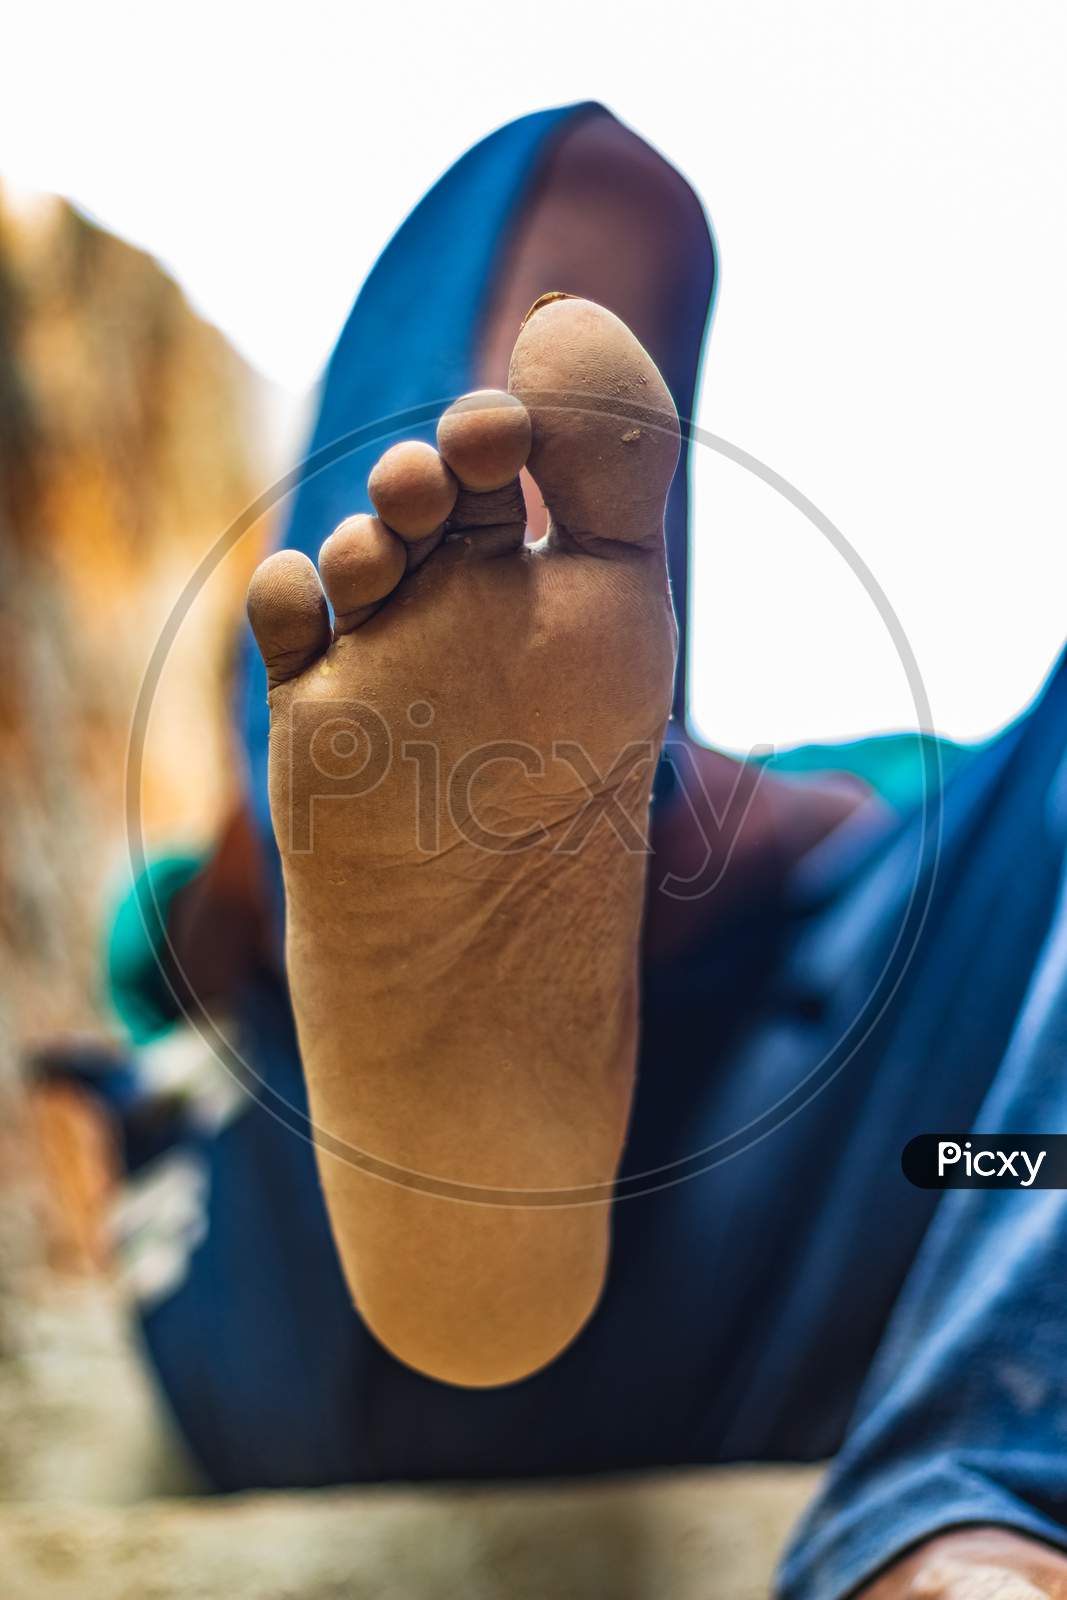 Men Feet Foot Legs On Low Angle Frame. Foot Pain. Men Sitting And Show Painful Foot. Having Painful Feet And Stretching Muscles Fatigue To Relieve Pain. Health Concepts. Human Foot With Leg Fingers.